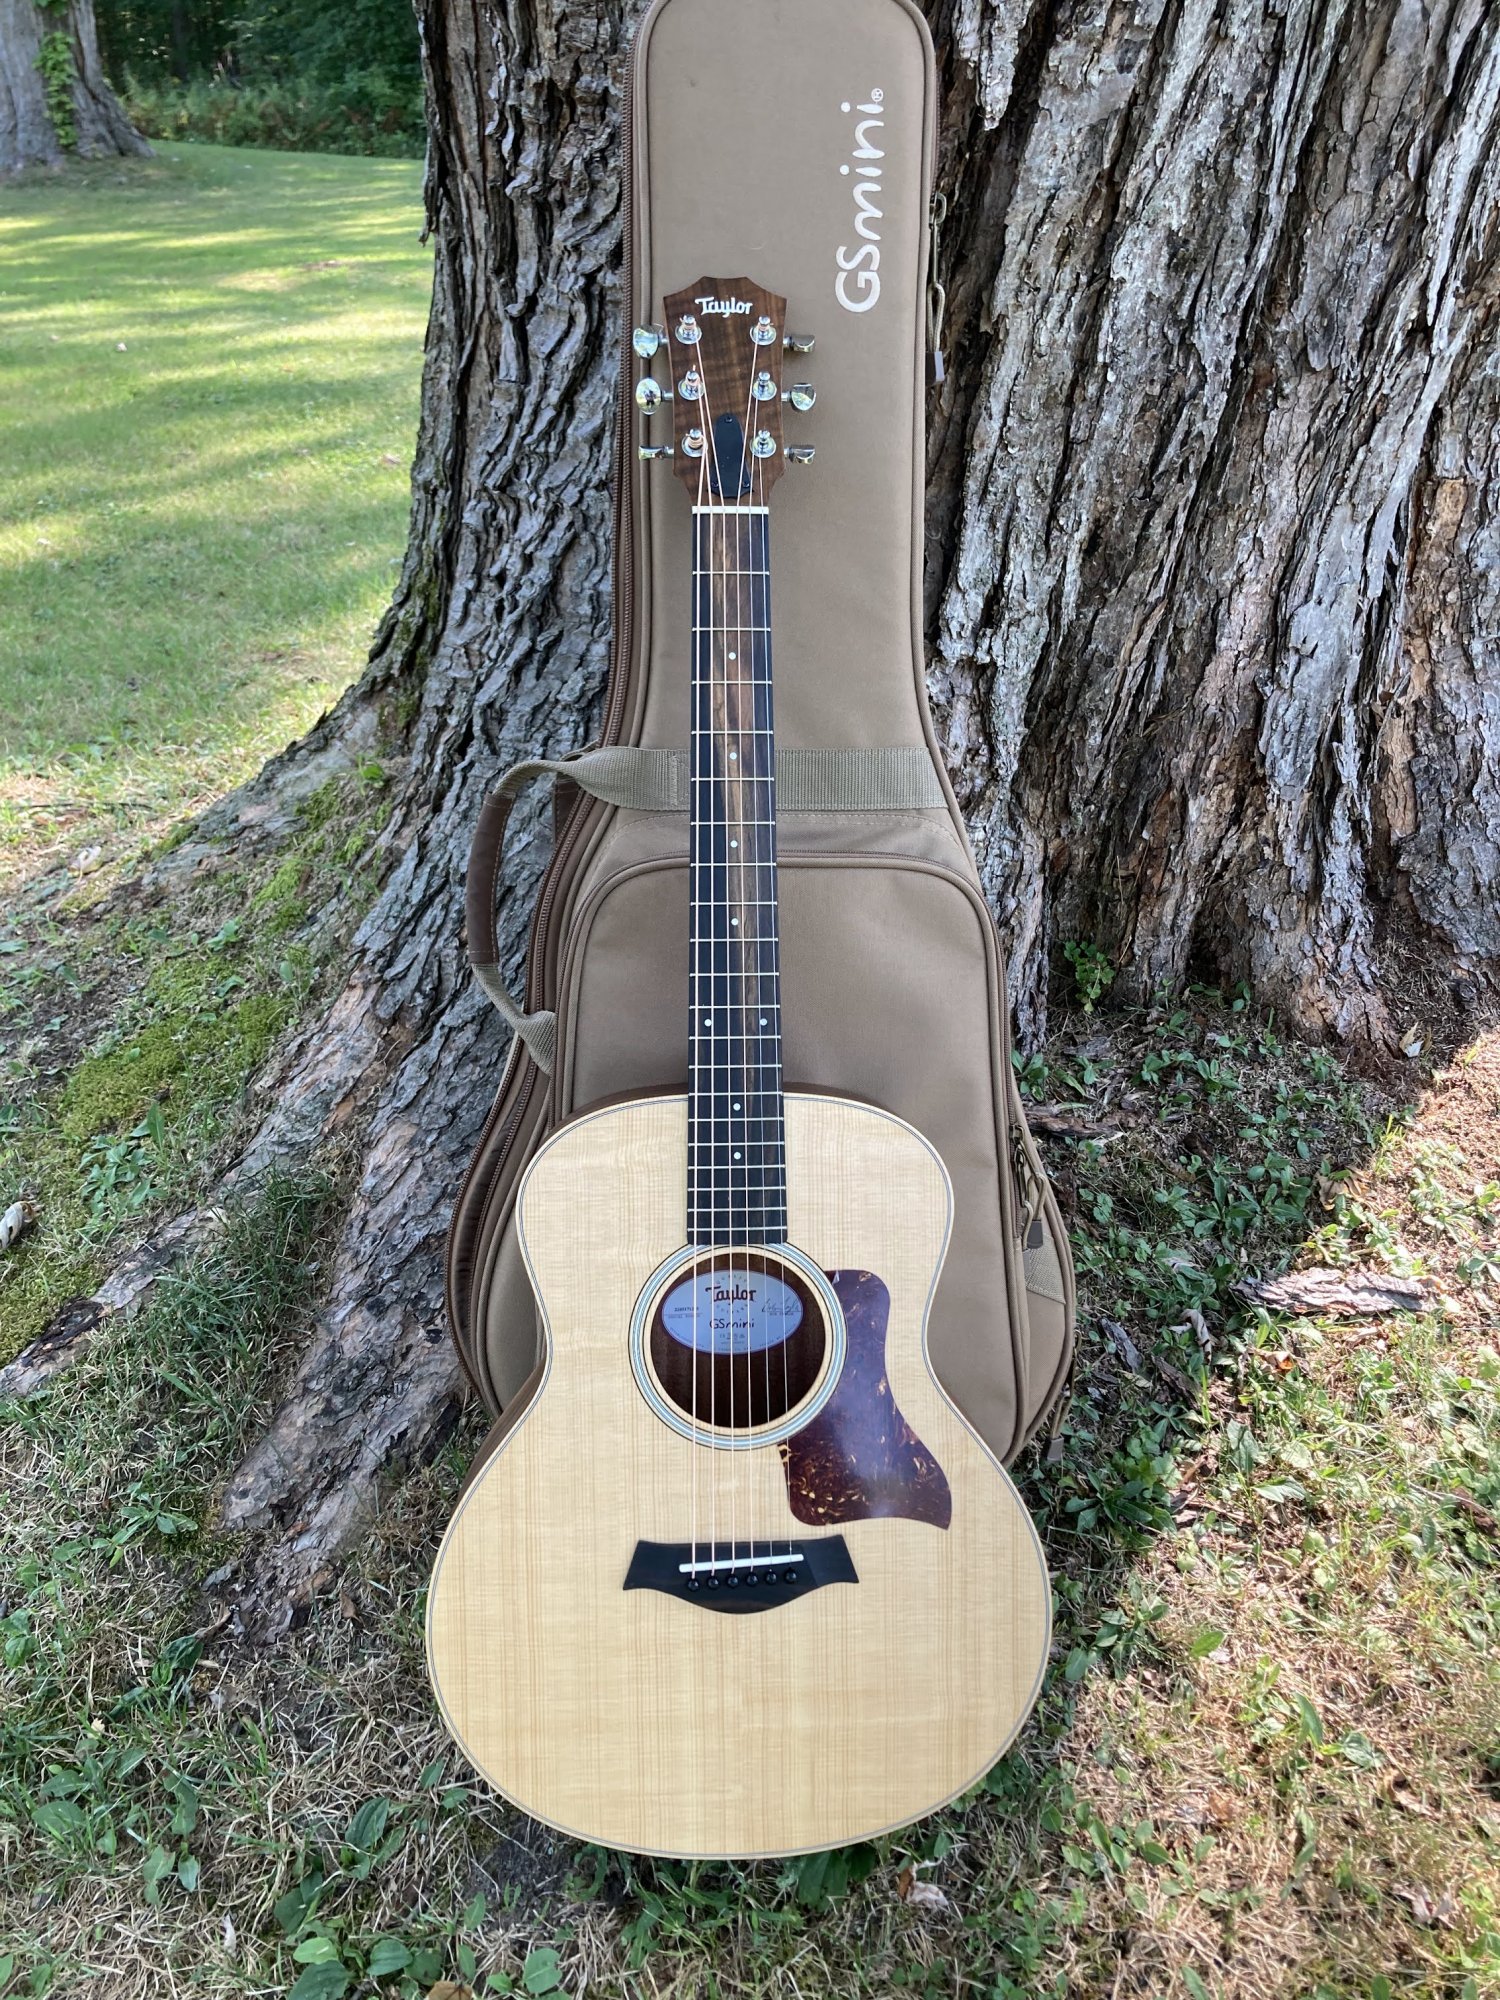 Sold - Taylor GS Mini Rosewood Back and Sides | Let's Talk Guild